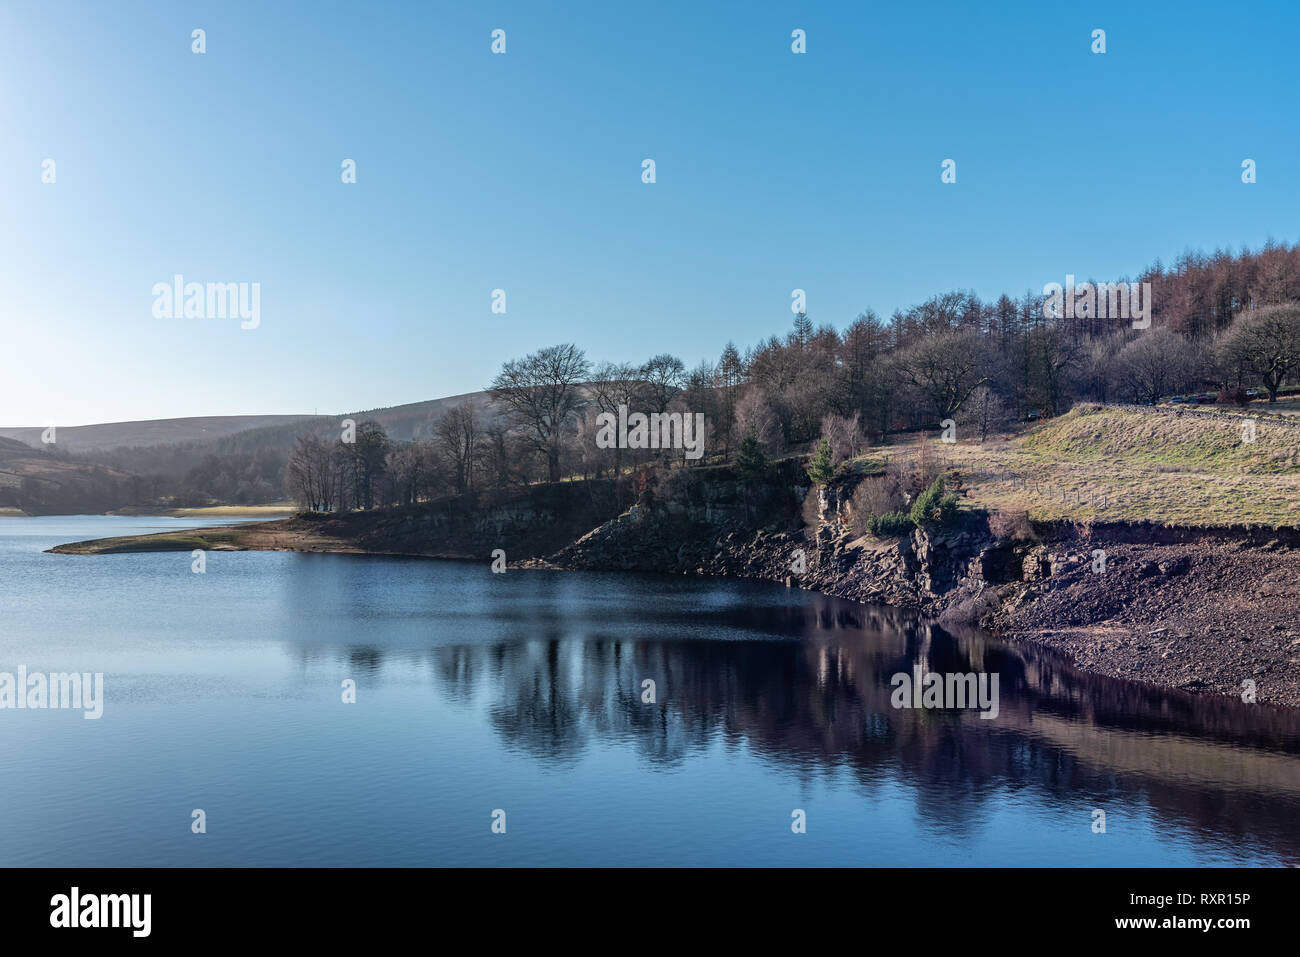 Erwood reservoir at Goyt valley within the Peak District National Park. Stock Photo